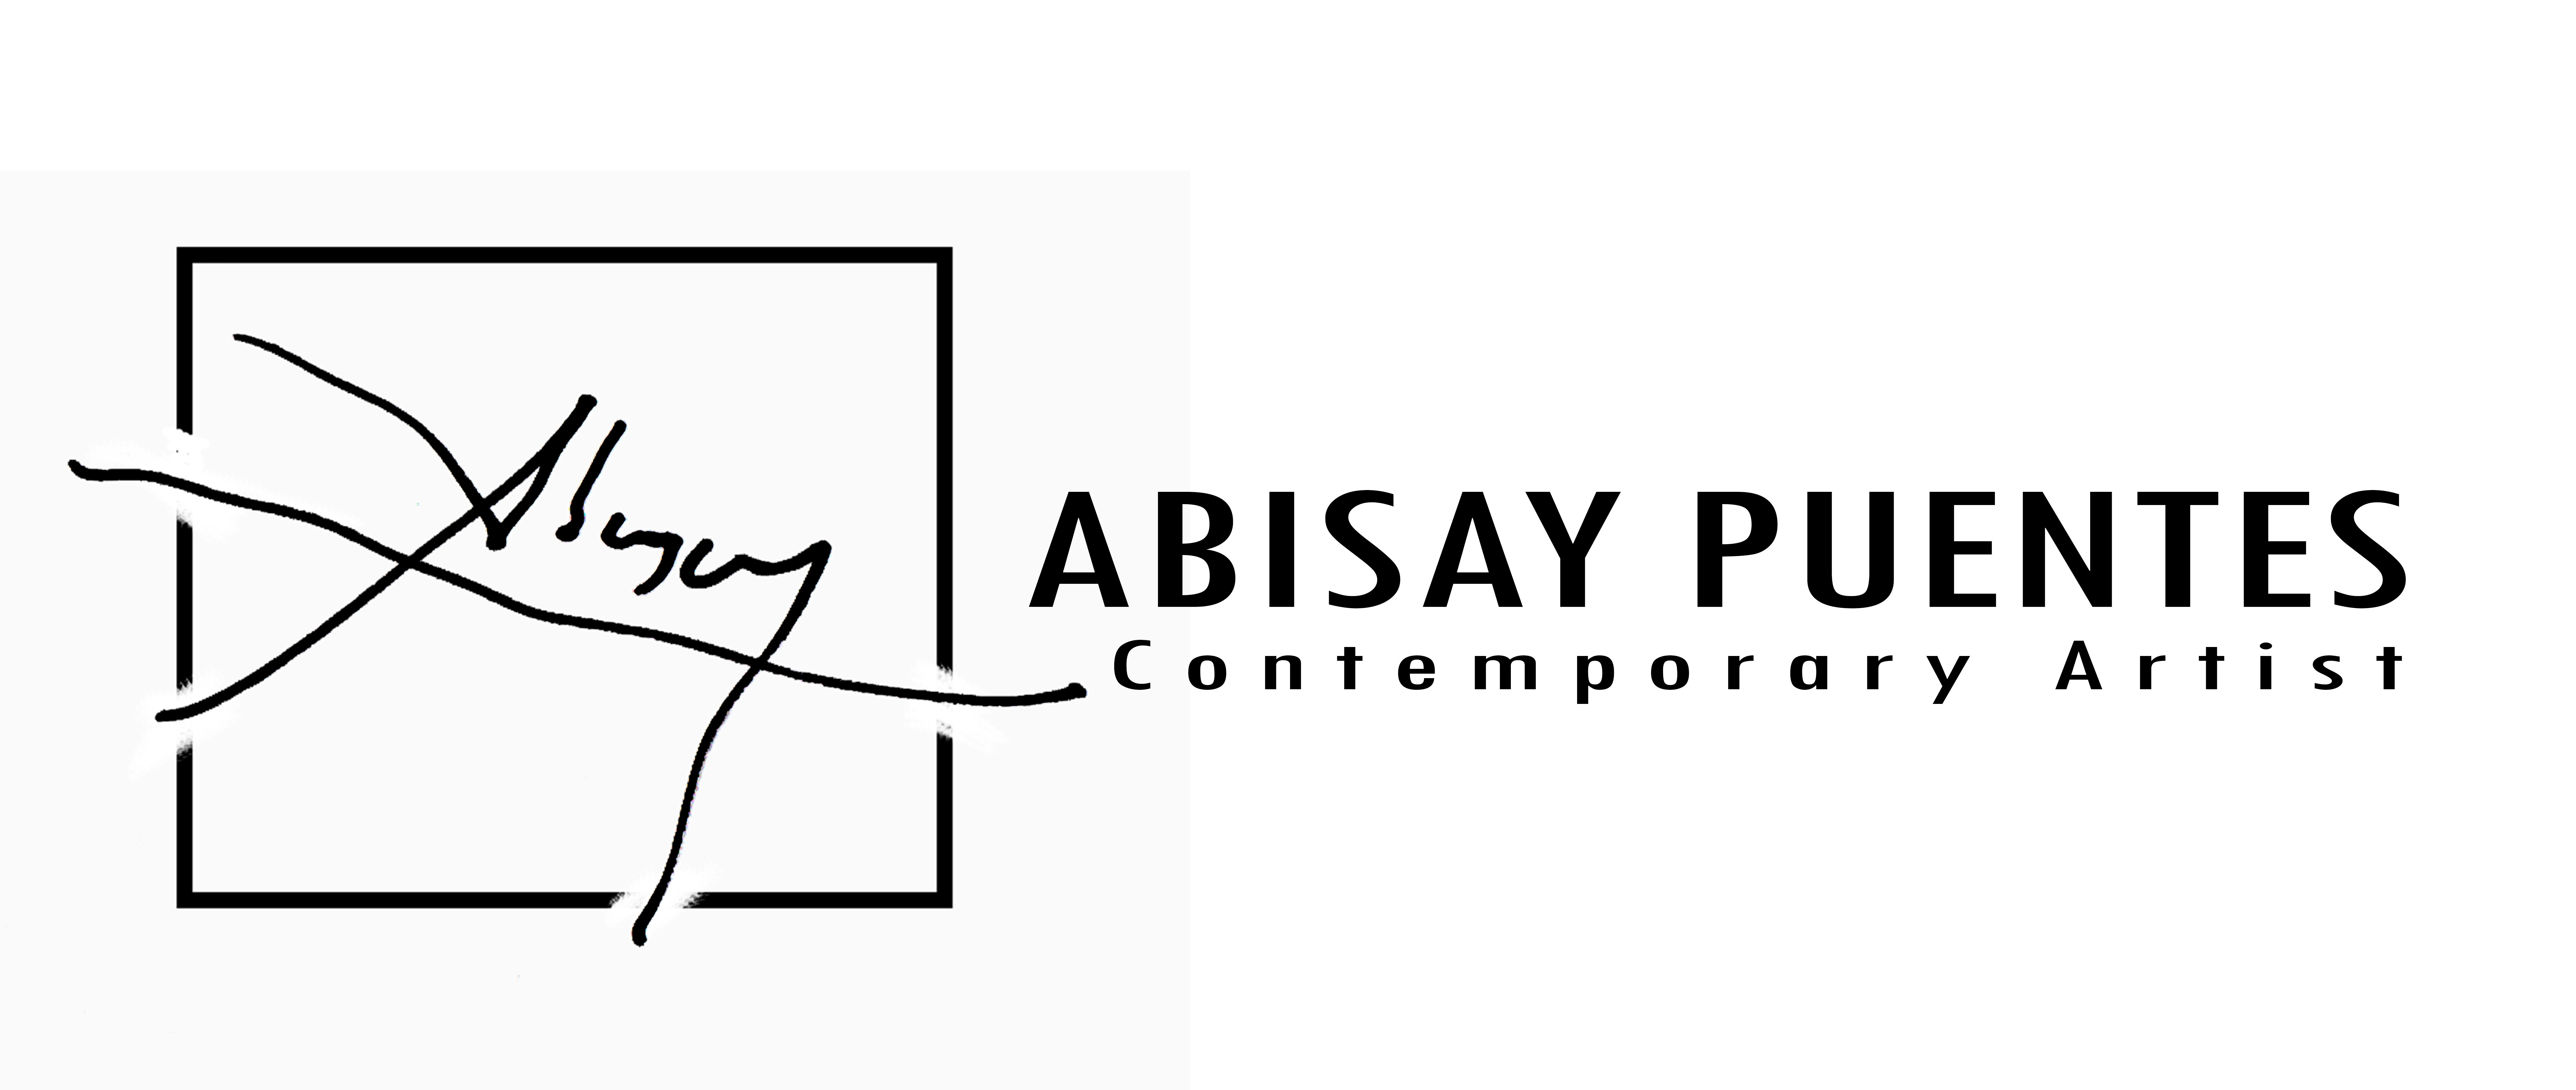 Abisay Puentes - Website